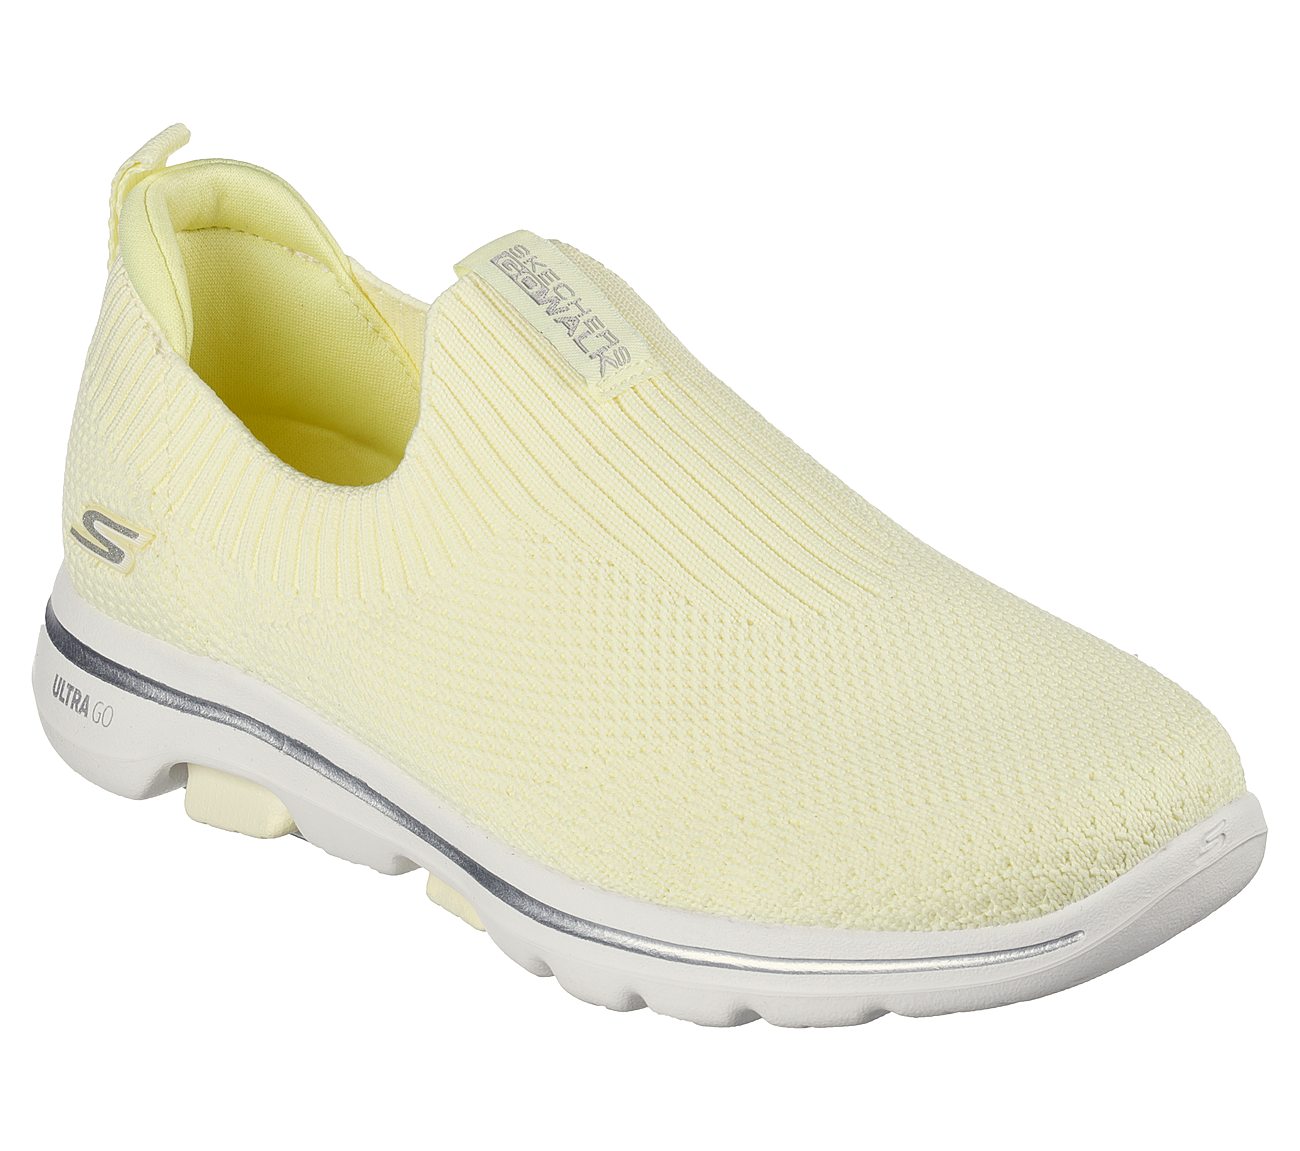 GO WALK 5 - TRENDY, YELLOW Footwear Lateral View